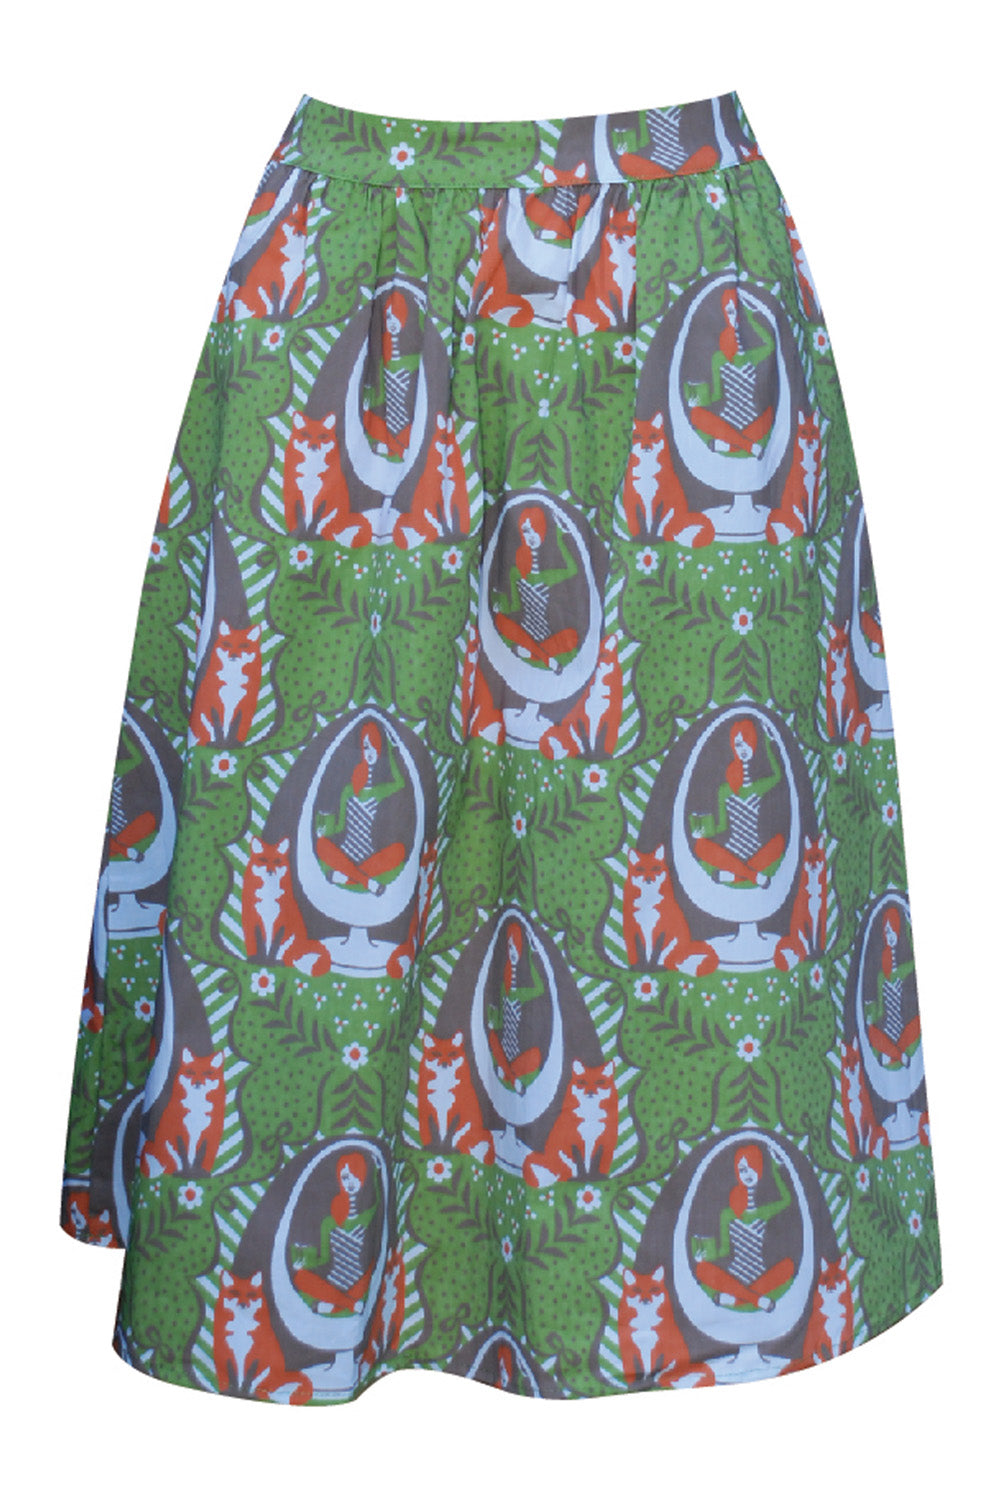 Olive green and orange gathered midi skirt with print of girl reading in egg chair with foxes and big orange zip